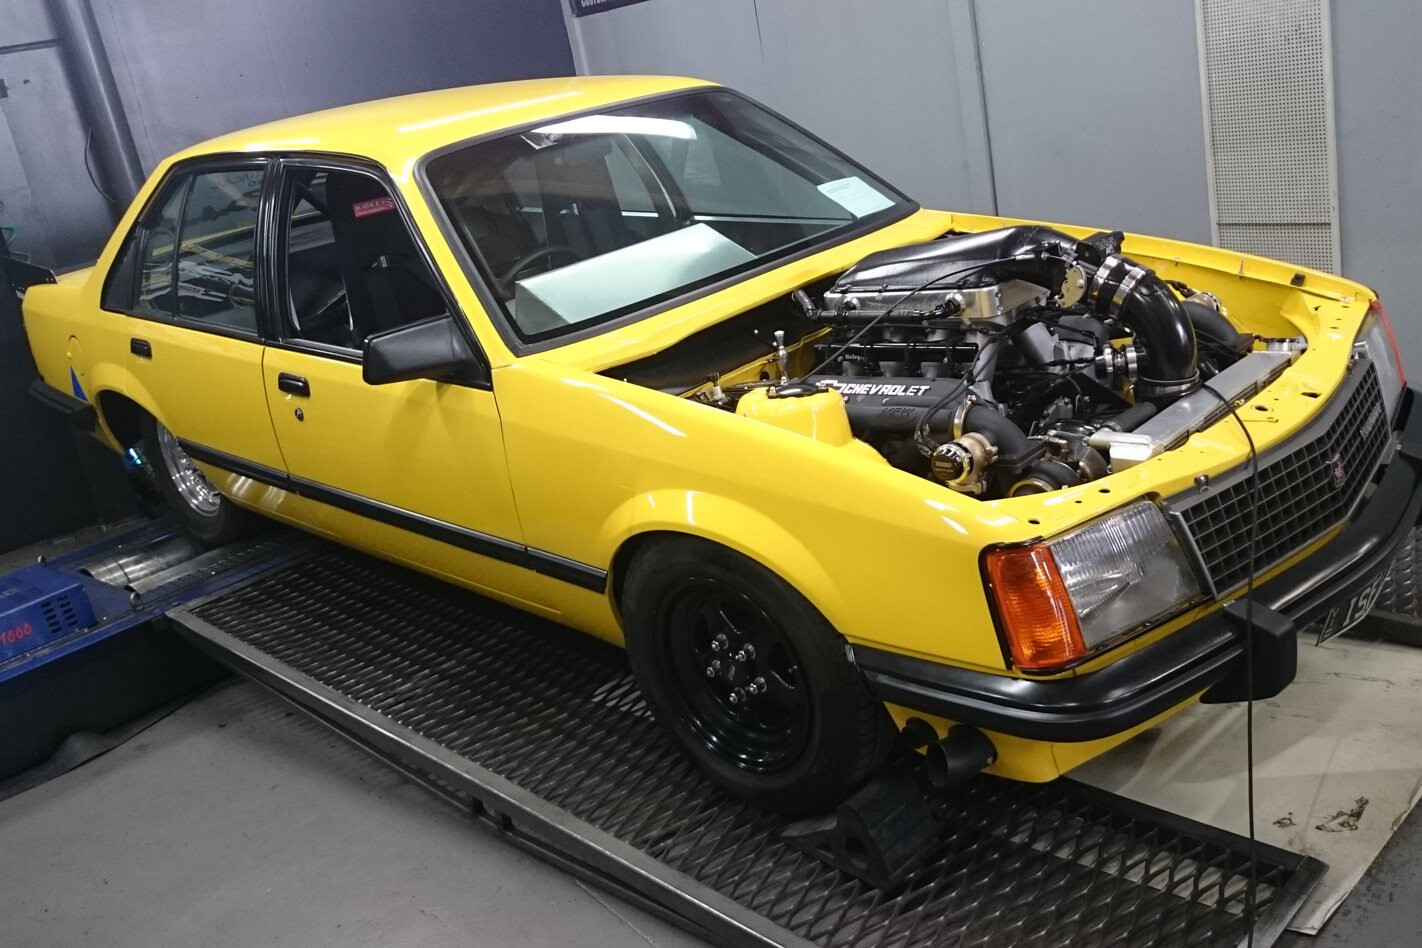 TWIN-TURBO COMMODORE ISFAIR MAKES OVER 1000RWHP